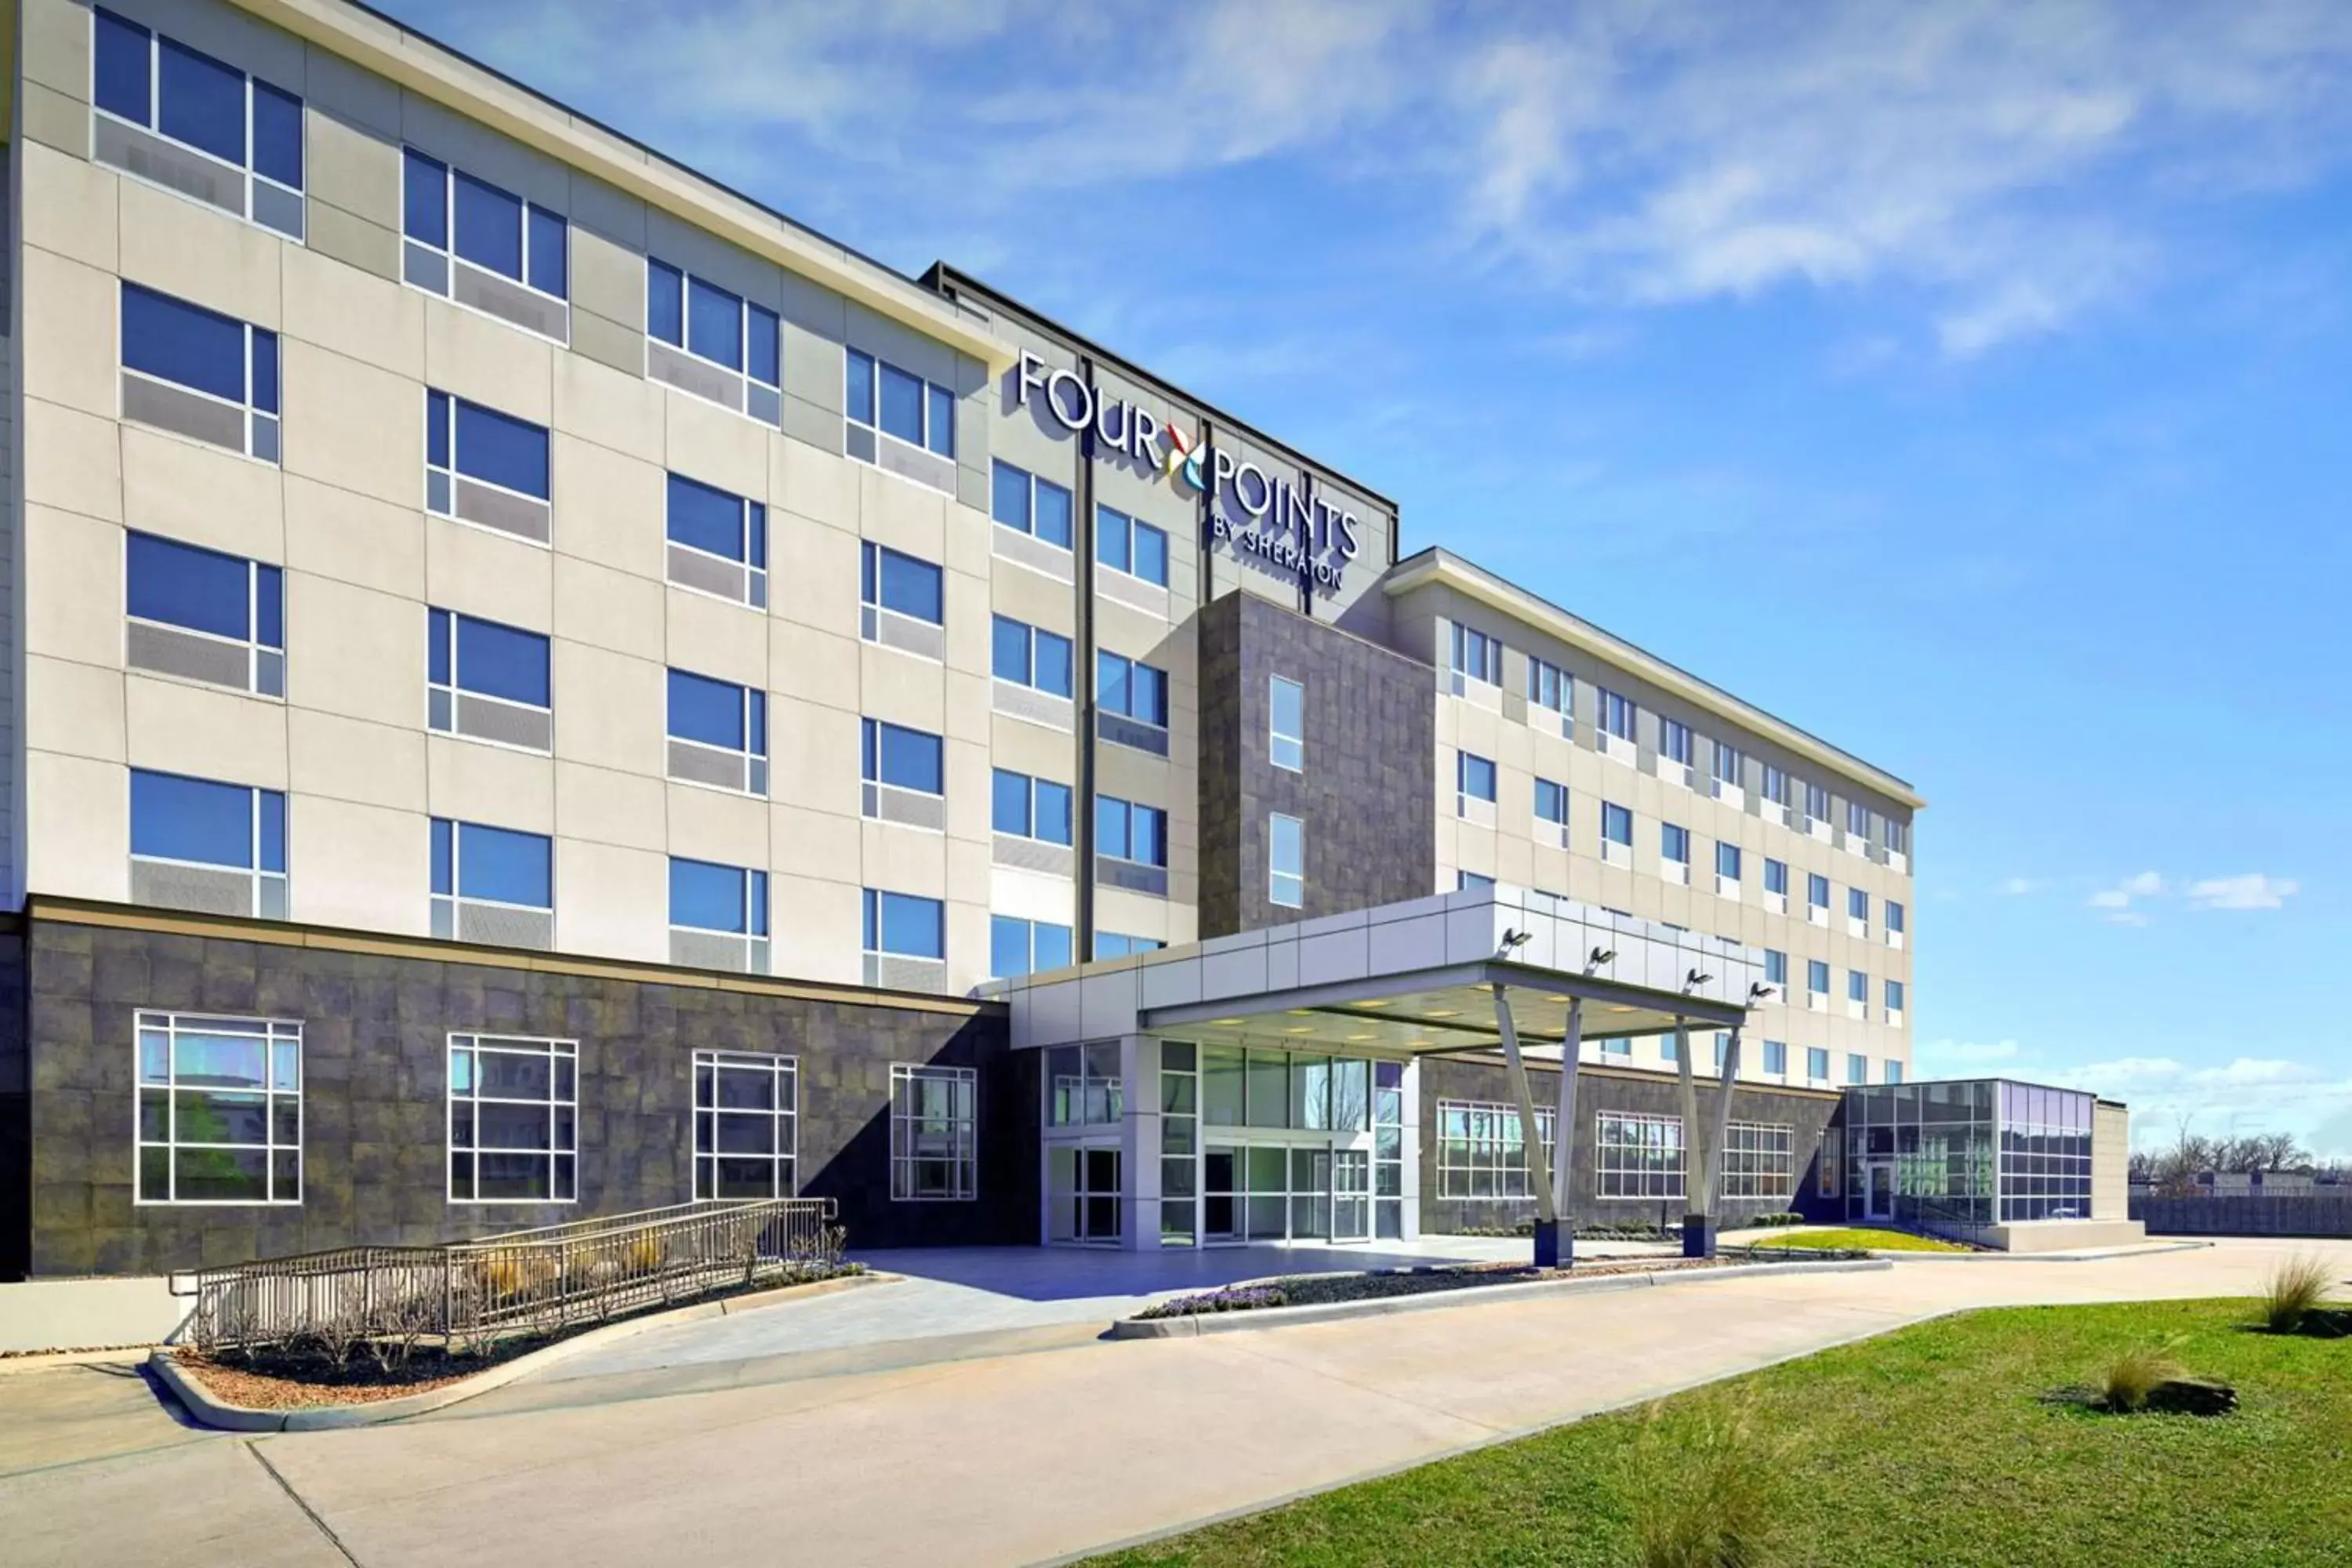 Property Building in Four Points by Sheraton Houston Intercontinental Airport